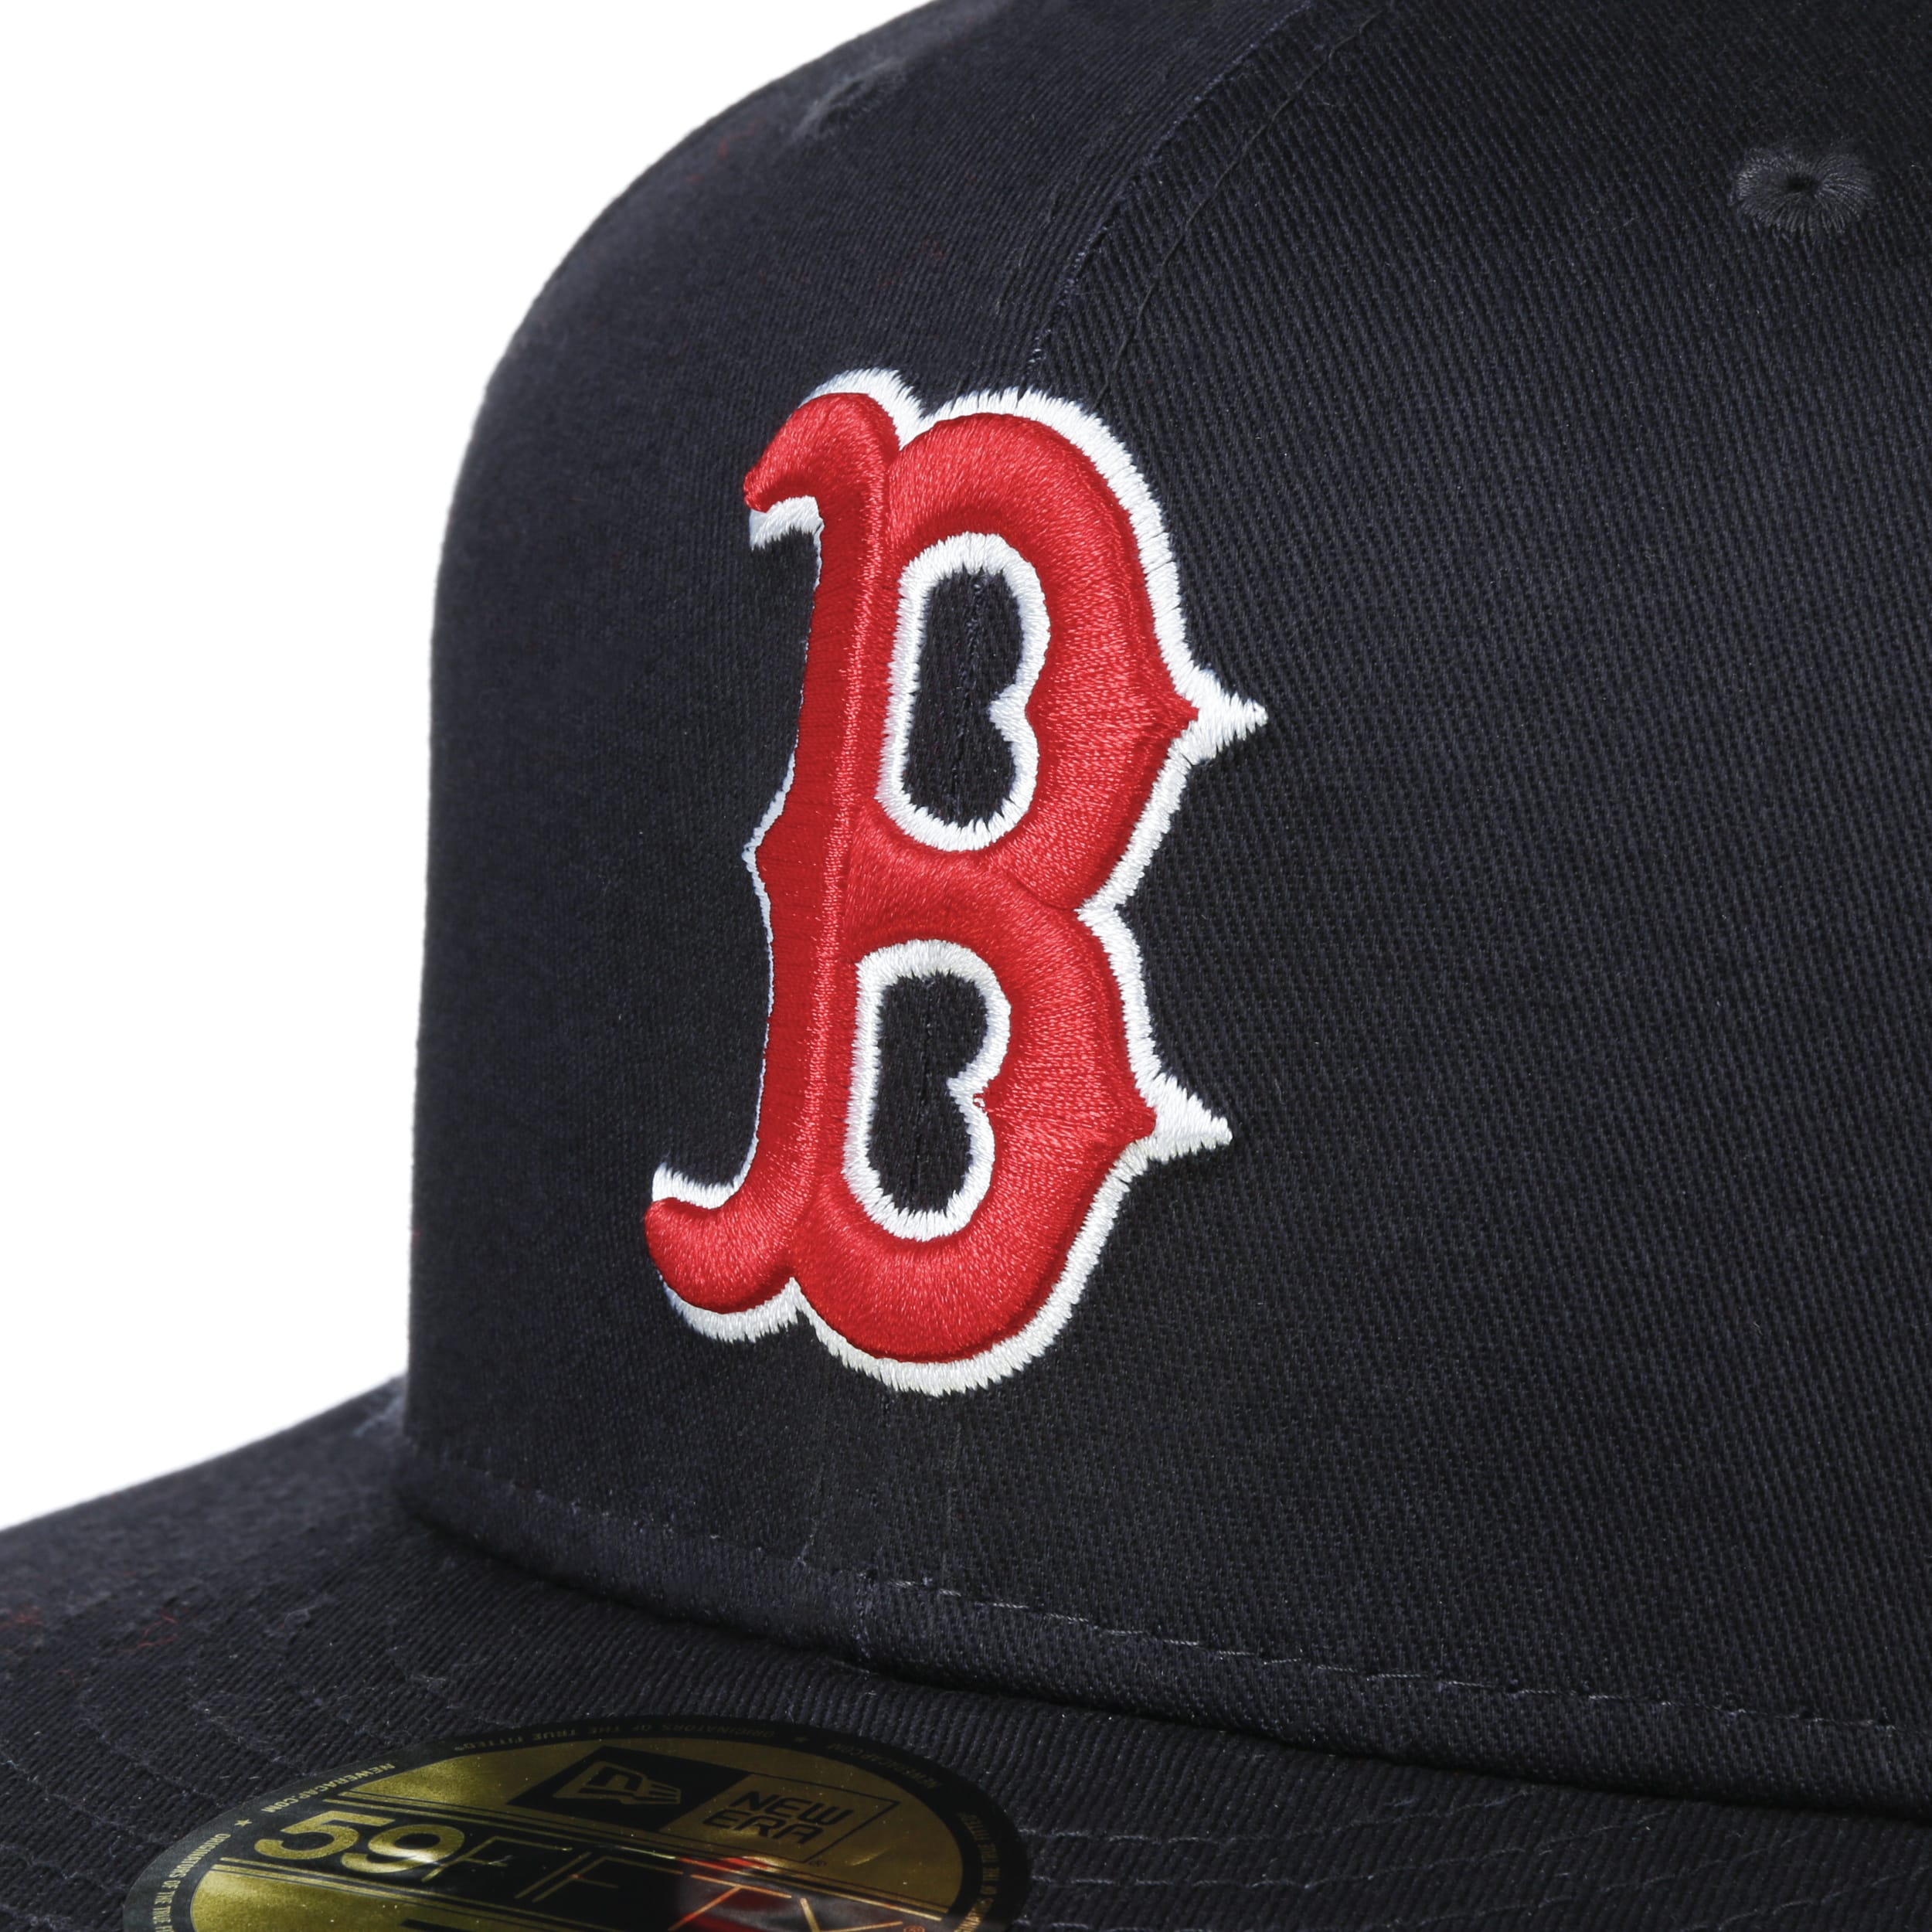 New Era Boston Red Sox 59FIFTY Fitted Hat (White/Navy) 7 5/8